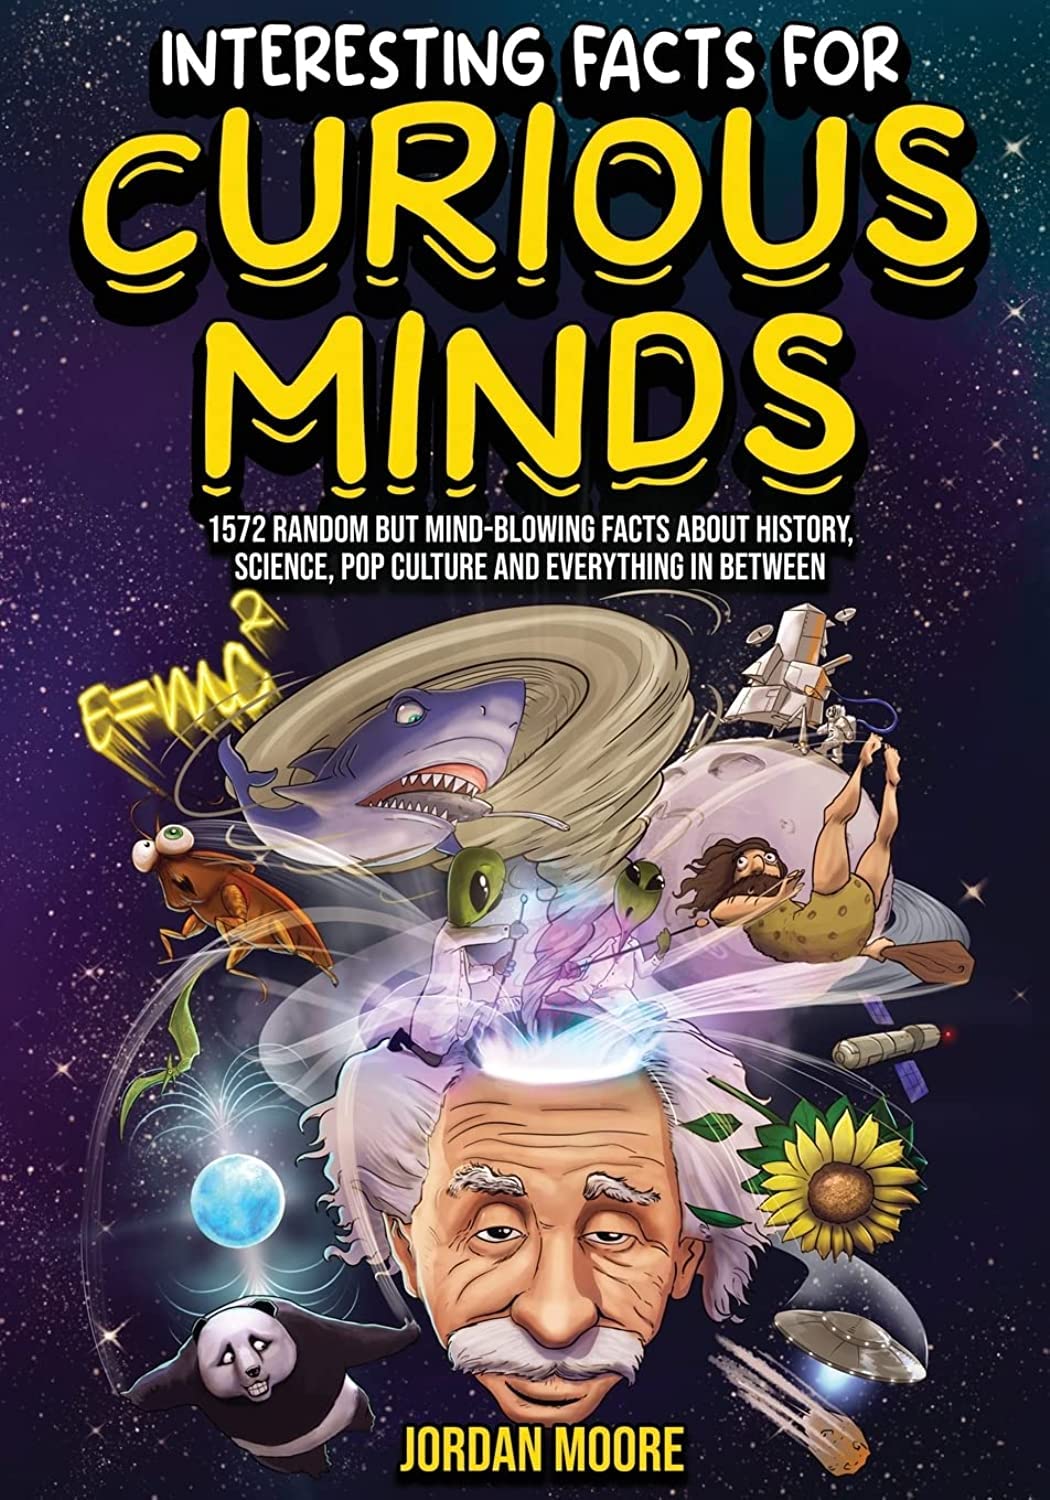 Interesting Facts For Curious Minds-1572 Random But Mind-Blowing Facts About History-Science-Pop Culture And Everything In Between-Stumbit Books